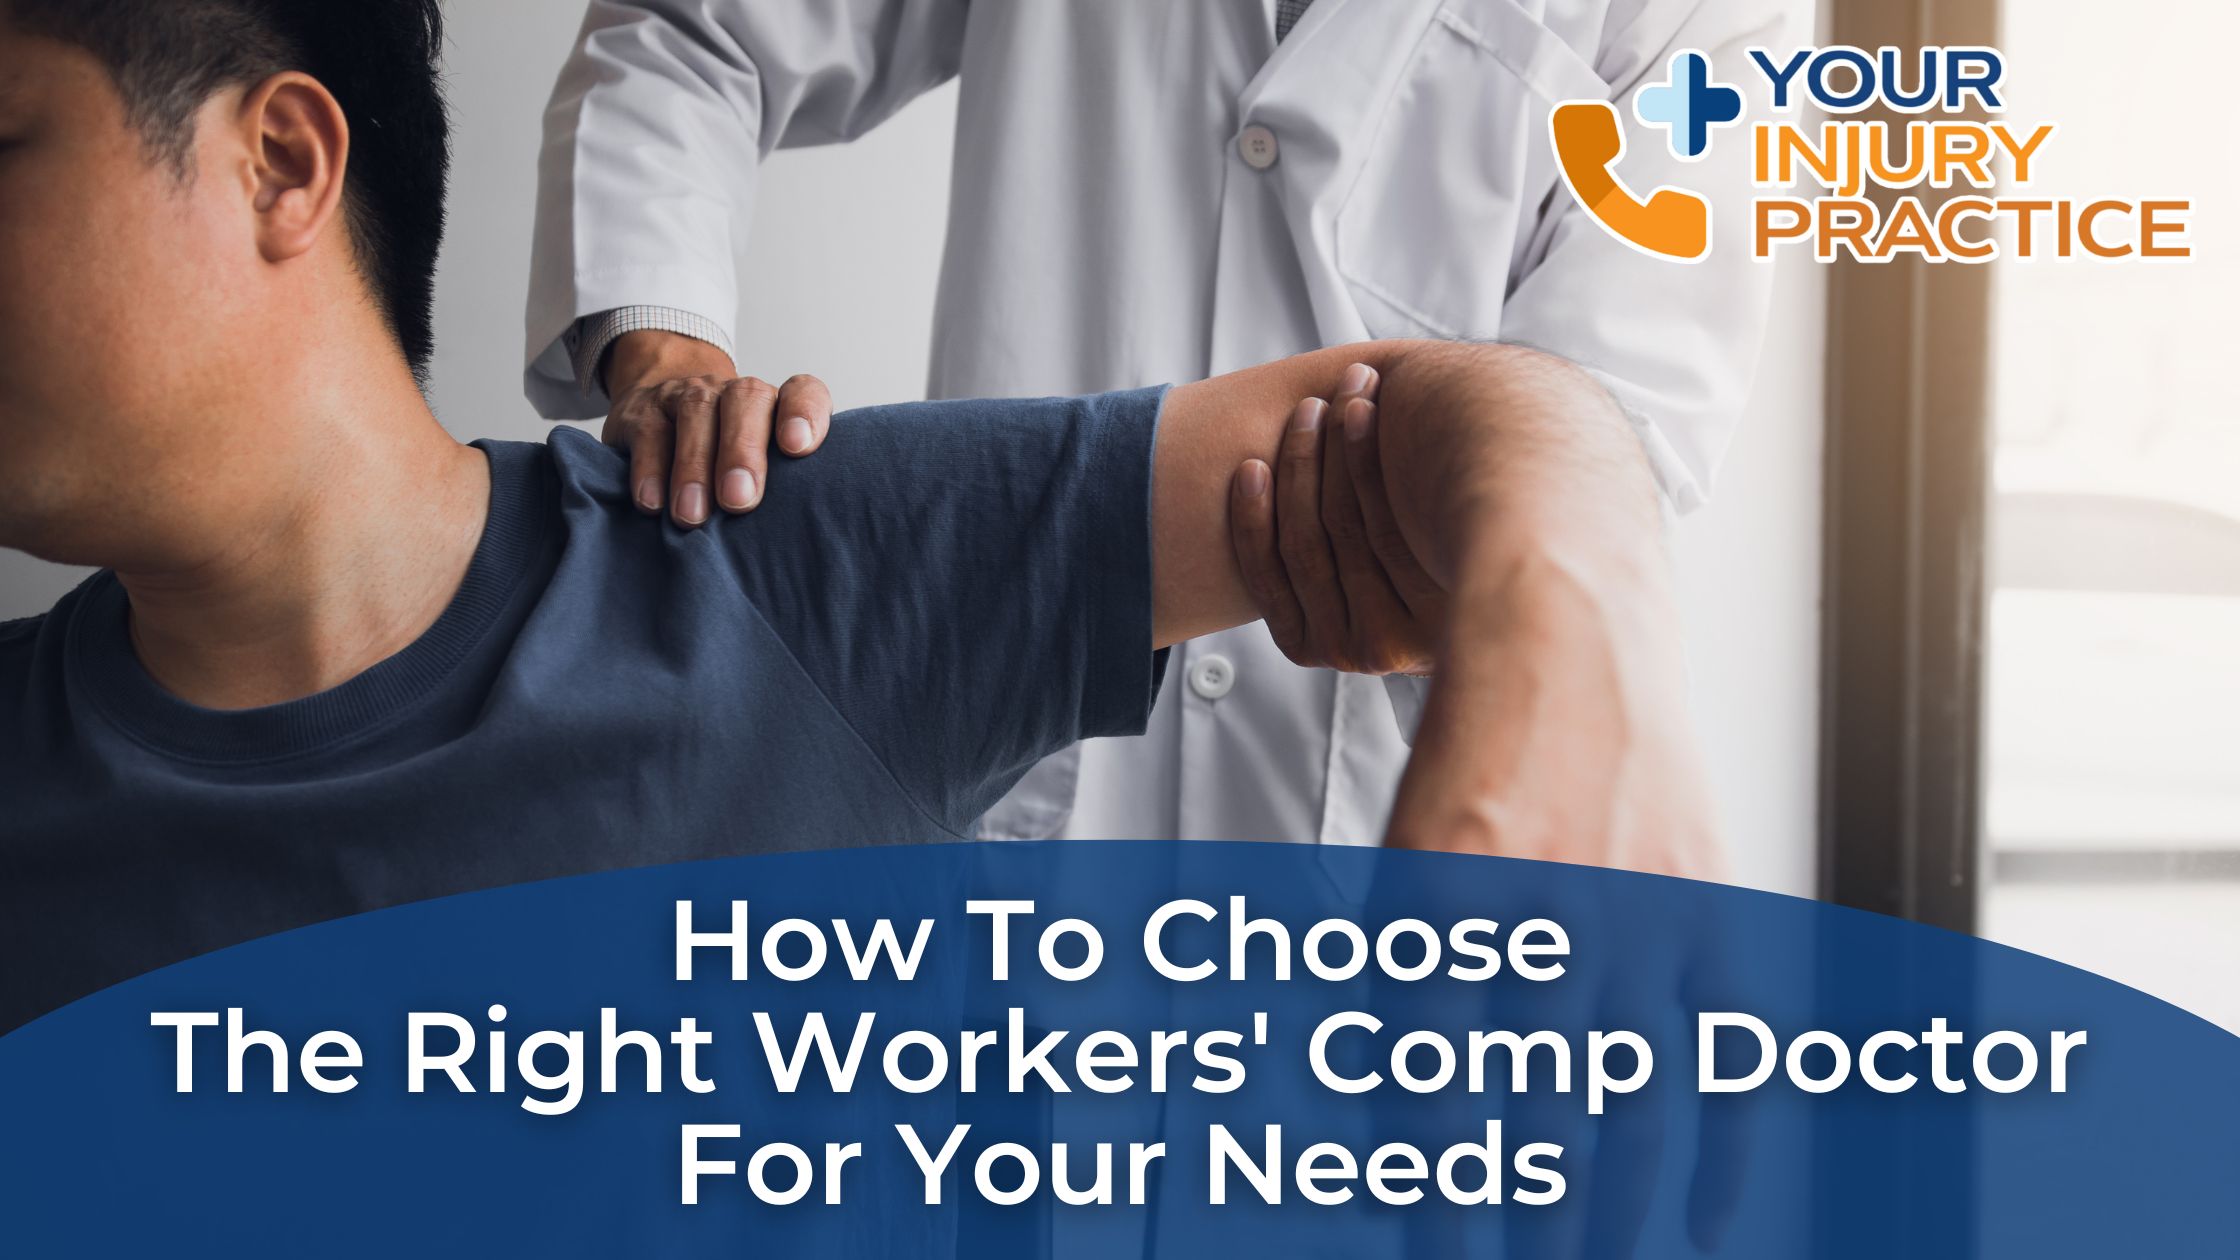 How to Choose the Right Workers' Comp Doctor for Your Needs